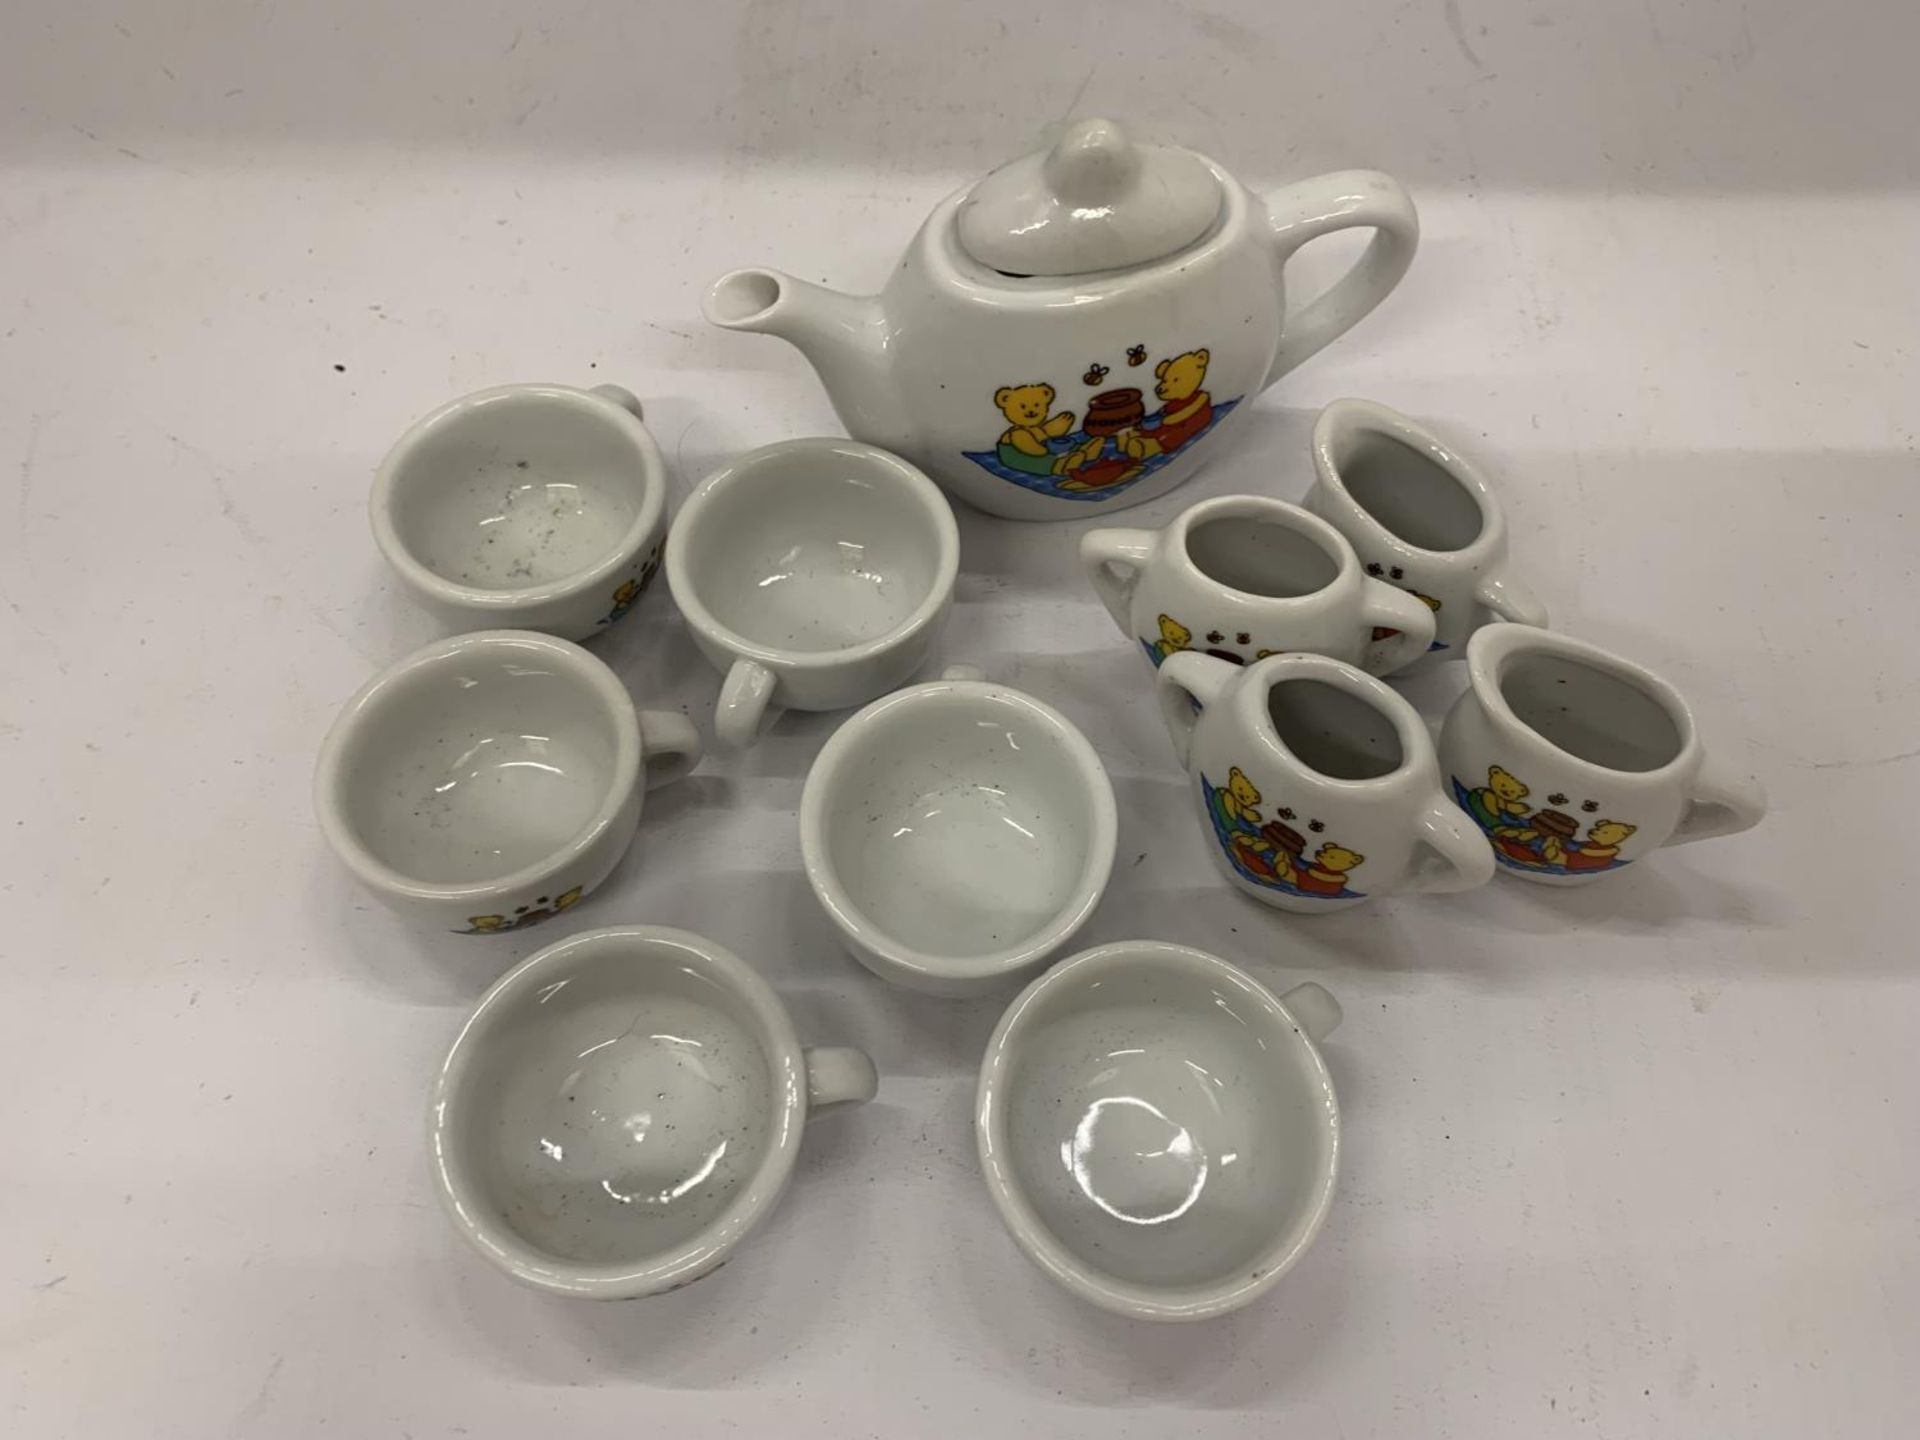 A MINIATURE CHILD'S POTTERY TEASET TO INCLUDE TEAPOT, JUGS, CUPS, ETC WITH A TEDDY BEARS PICNIC - Image 4 of 10